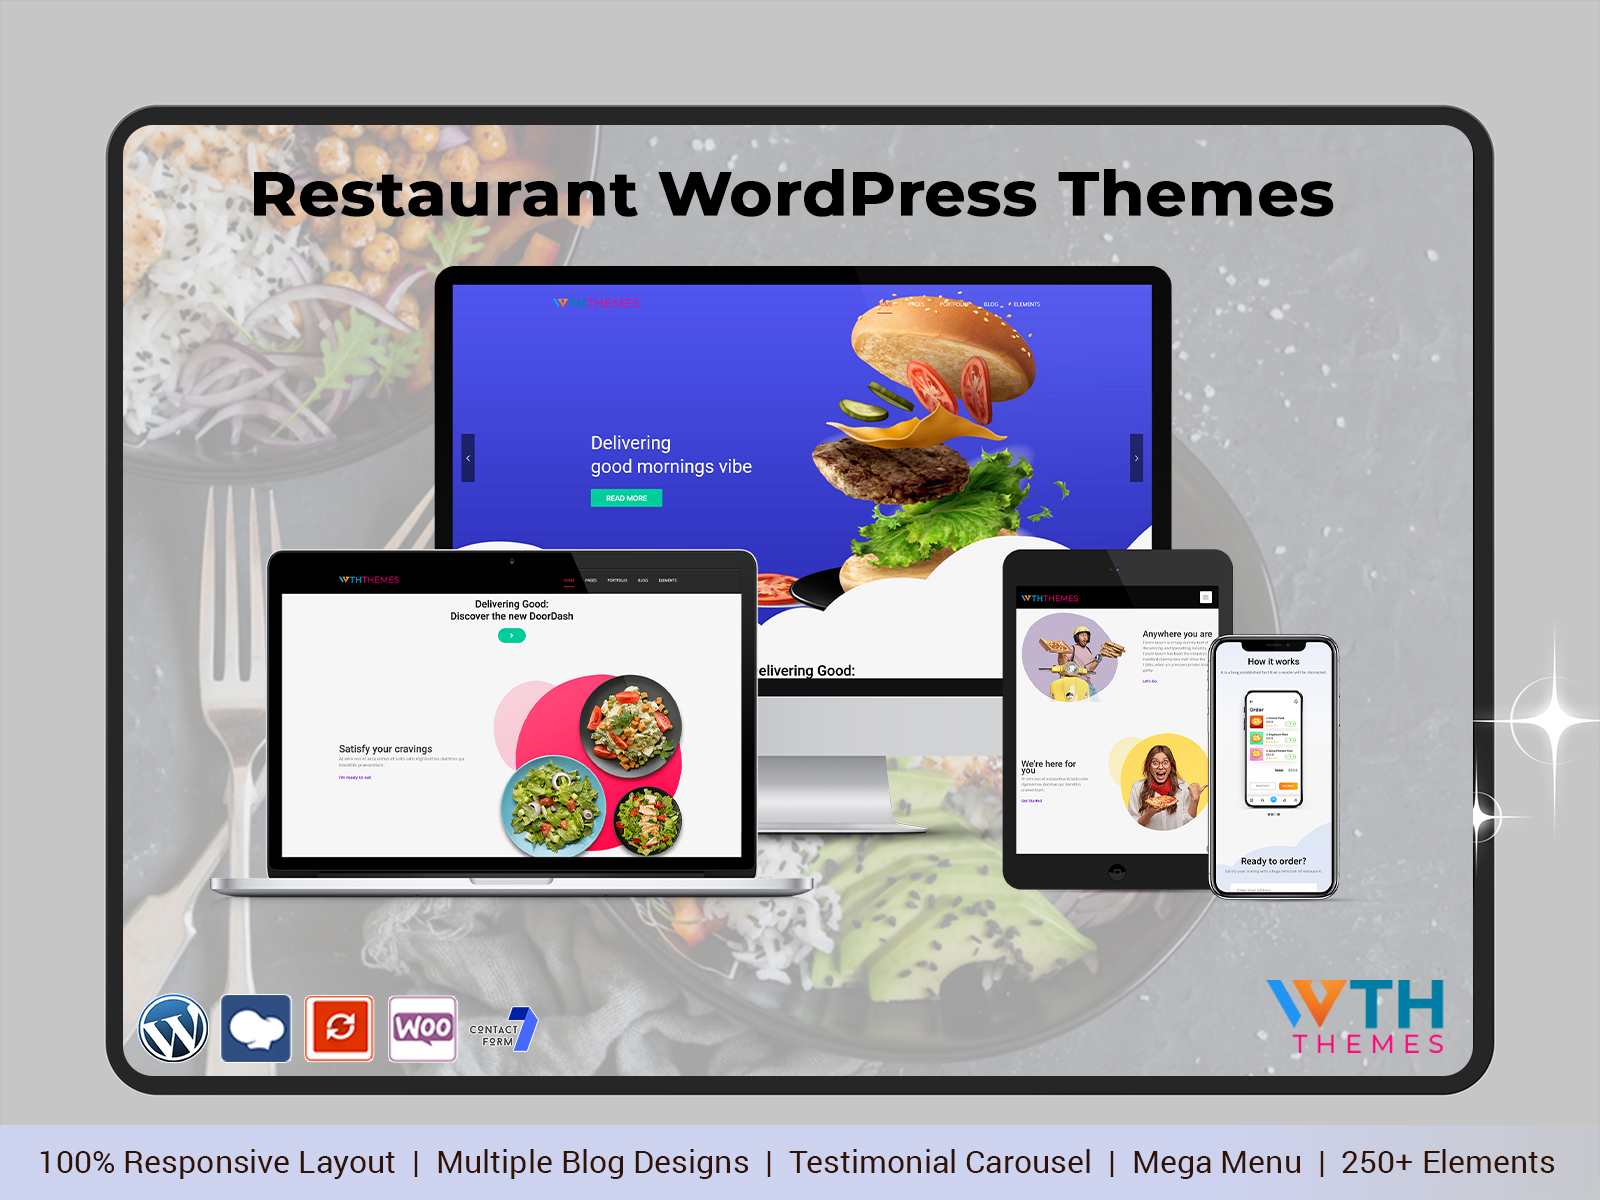 Restaurant WordPress Theme With Simple And Cool Features